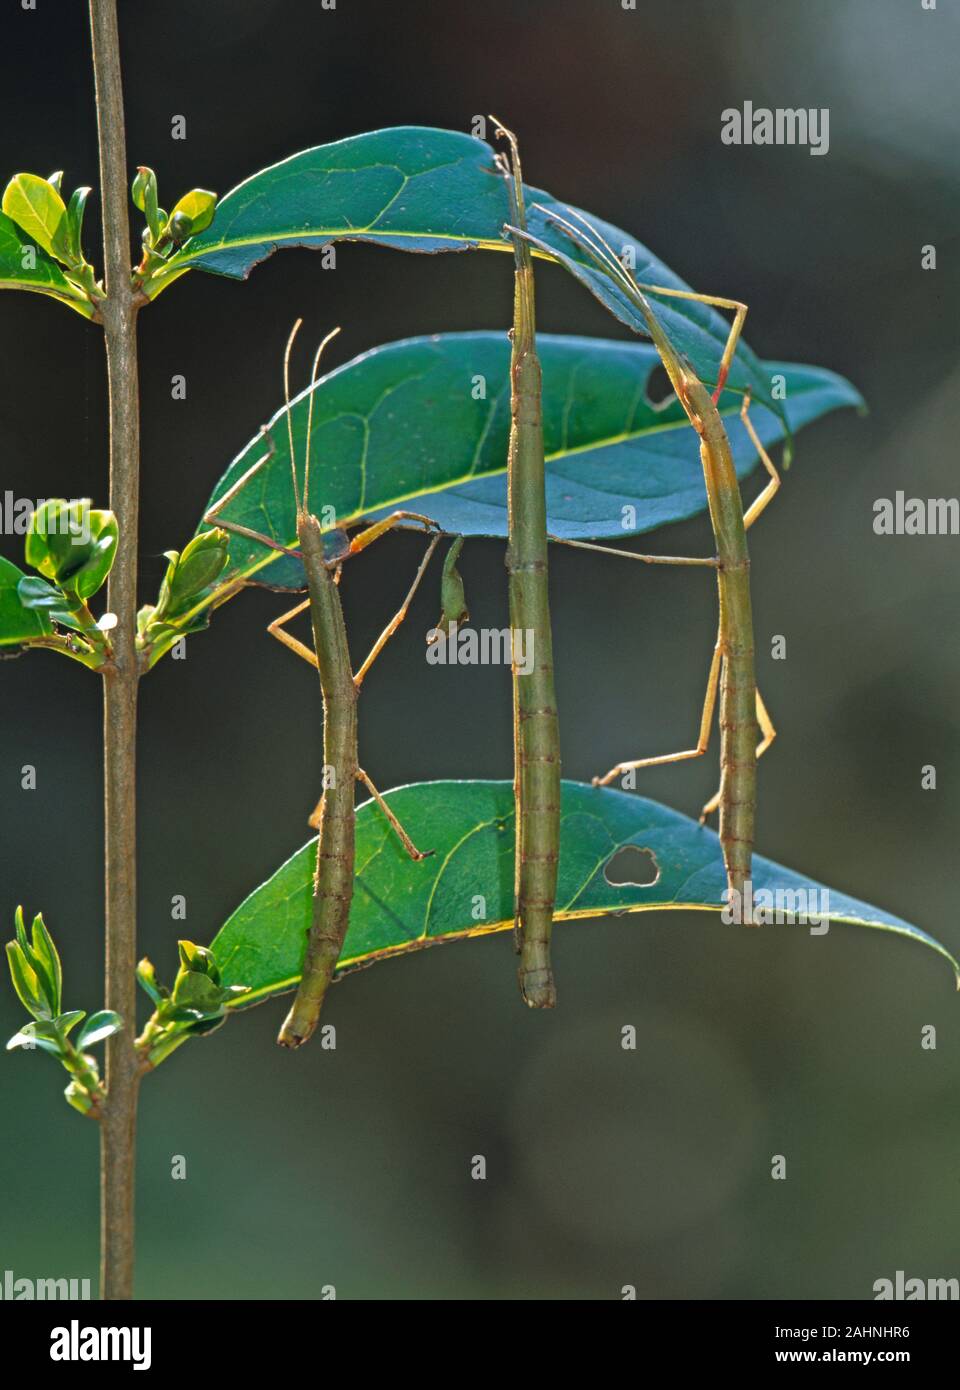 INDIAN STICK INSECTS (Carausius morosus).  Three individuals on Privet twig food plant. Parthenogenetic. Body shape mimic food plants stems. Nocturnal Stock Photo